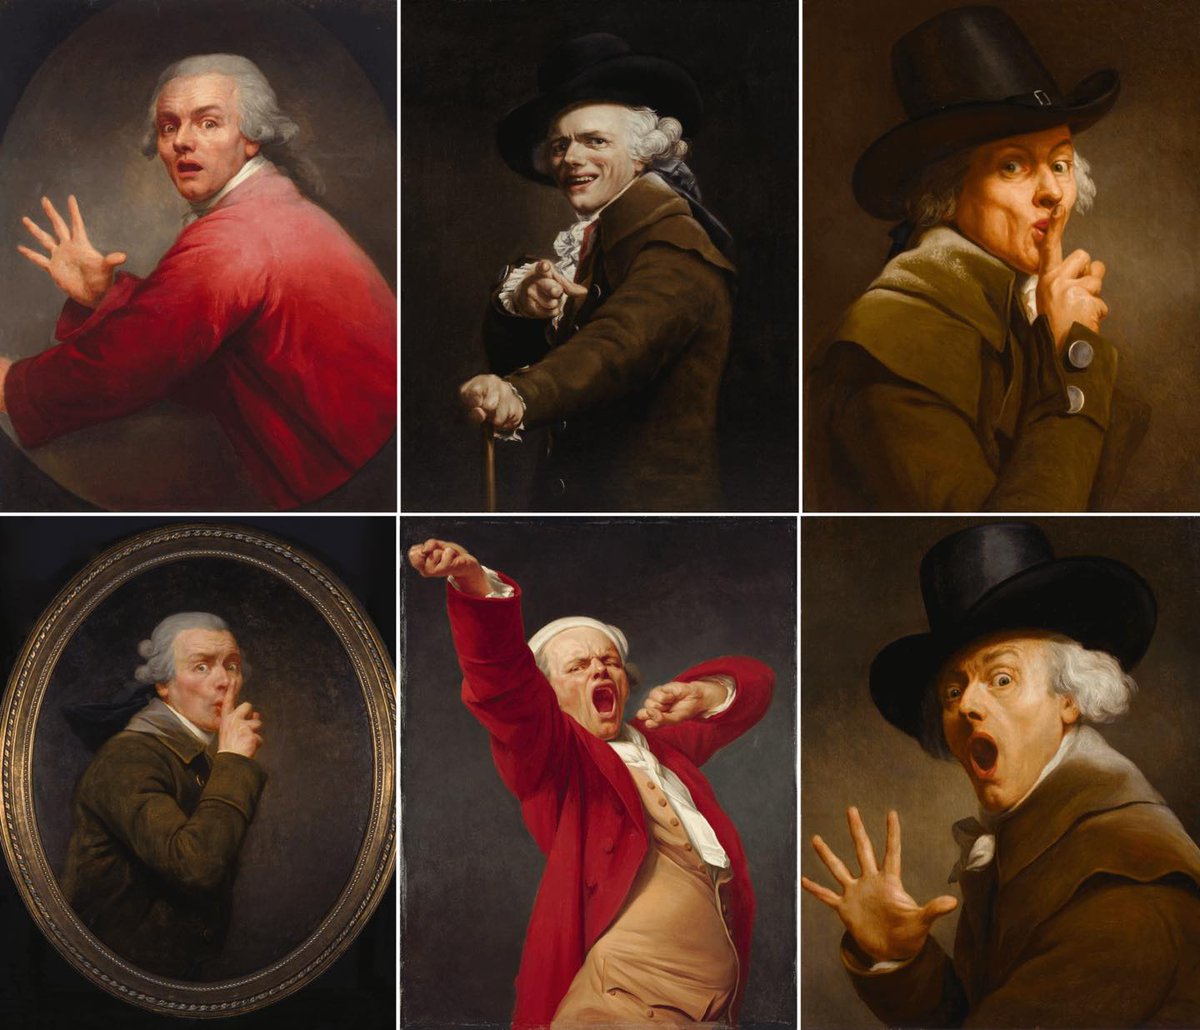 The many faces of Joseph Ducreux (1735-1802) - by himself.